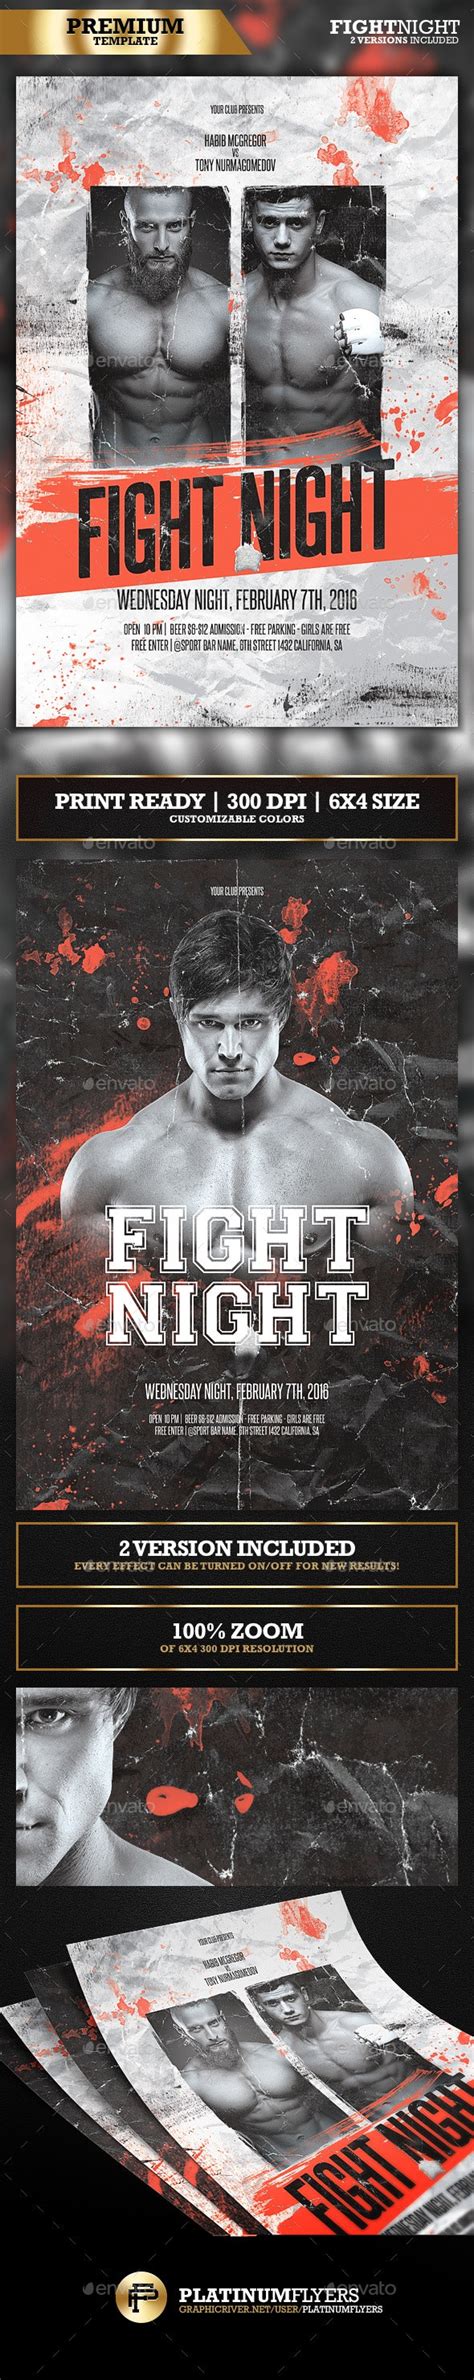 Mma Fight Night Boxing Fight Flyer Ufc Print Templates